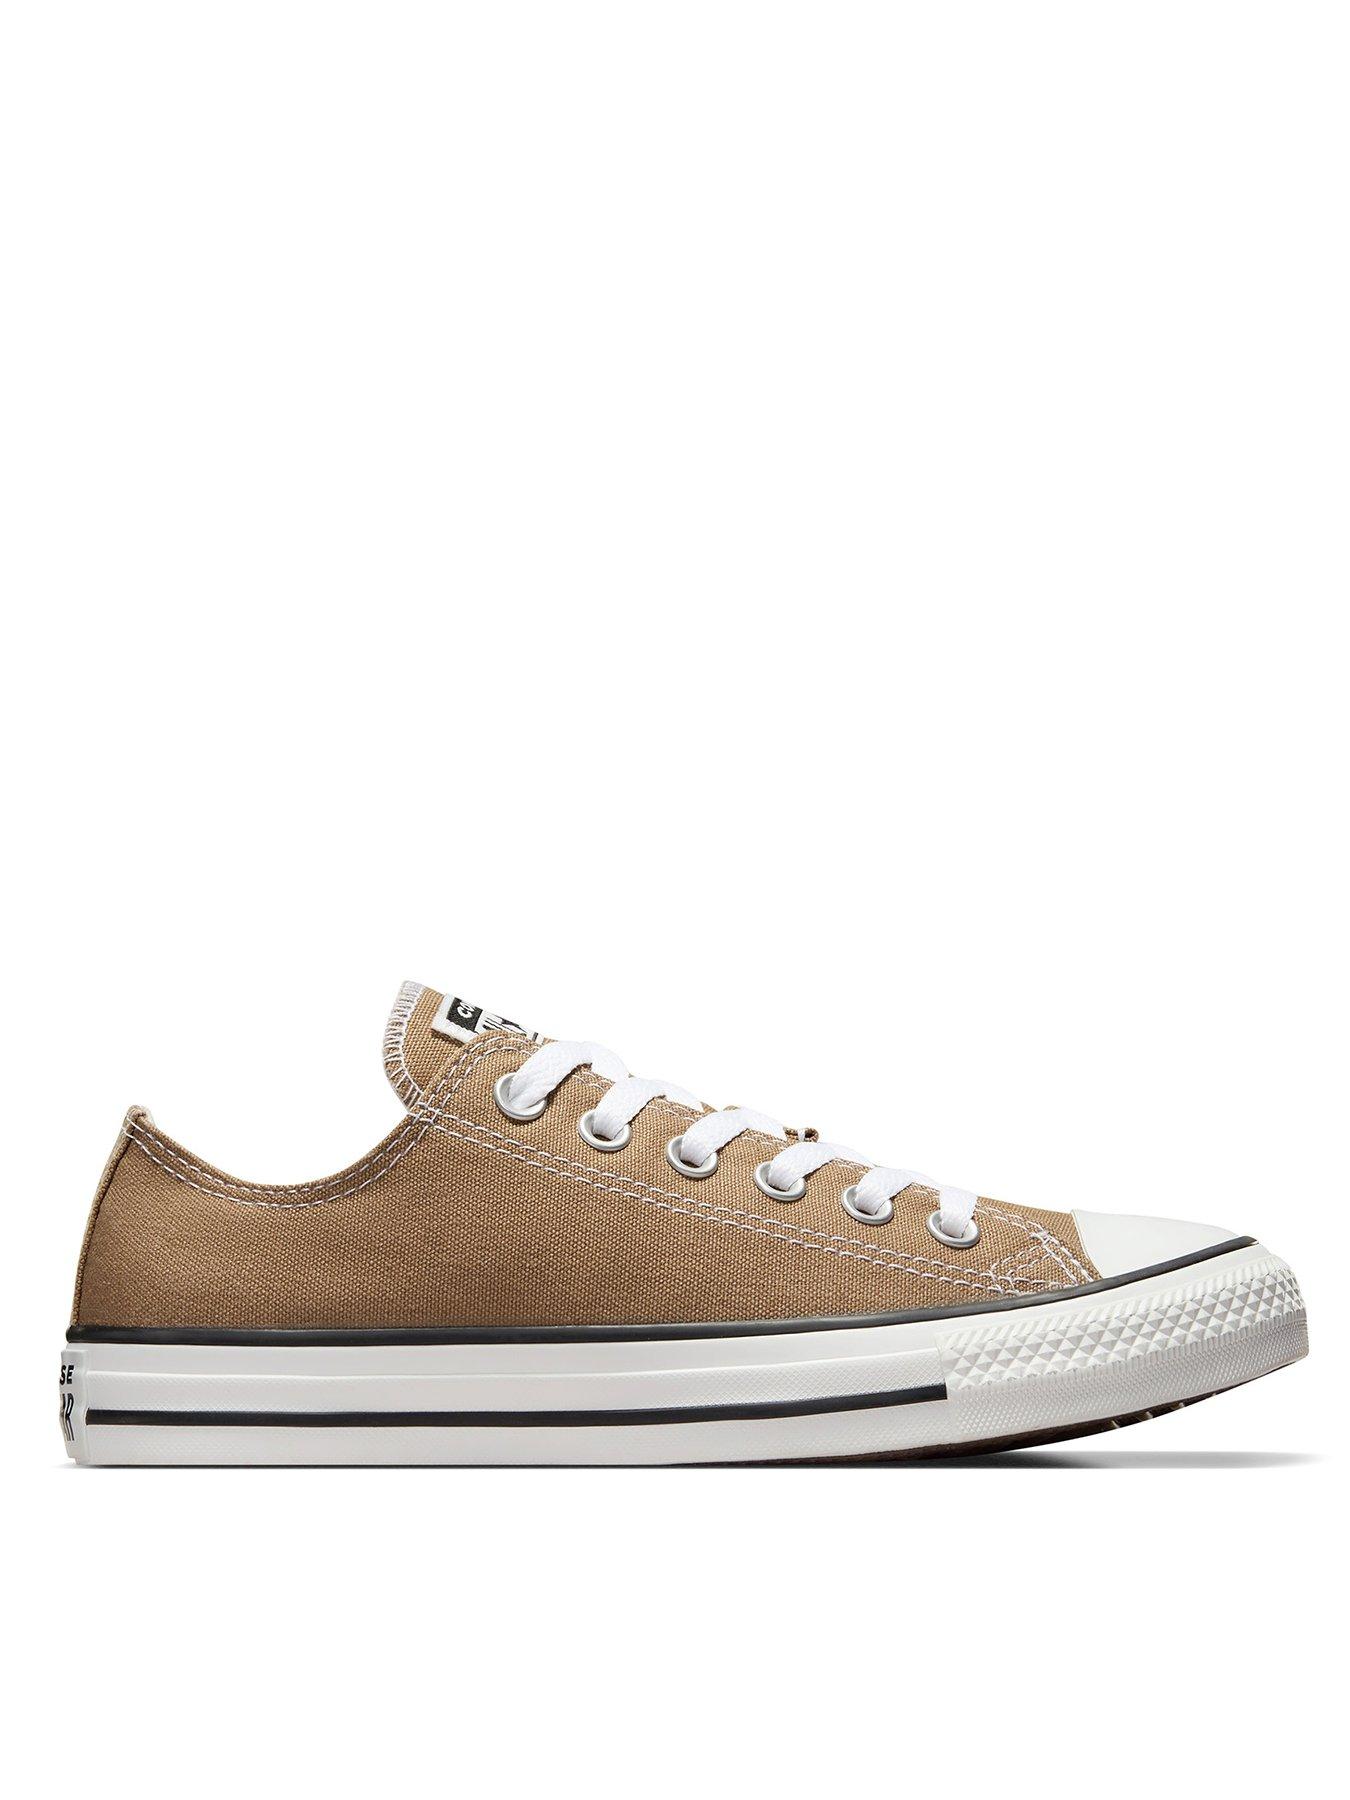 Converse Mens Ox Trainers - Light Brown, Light Brown, Size 9, Men